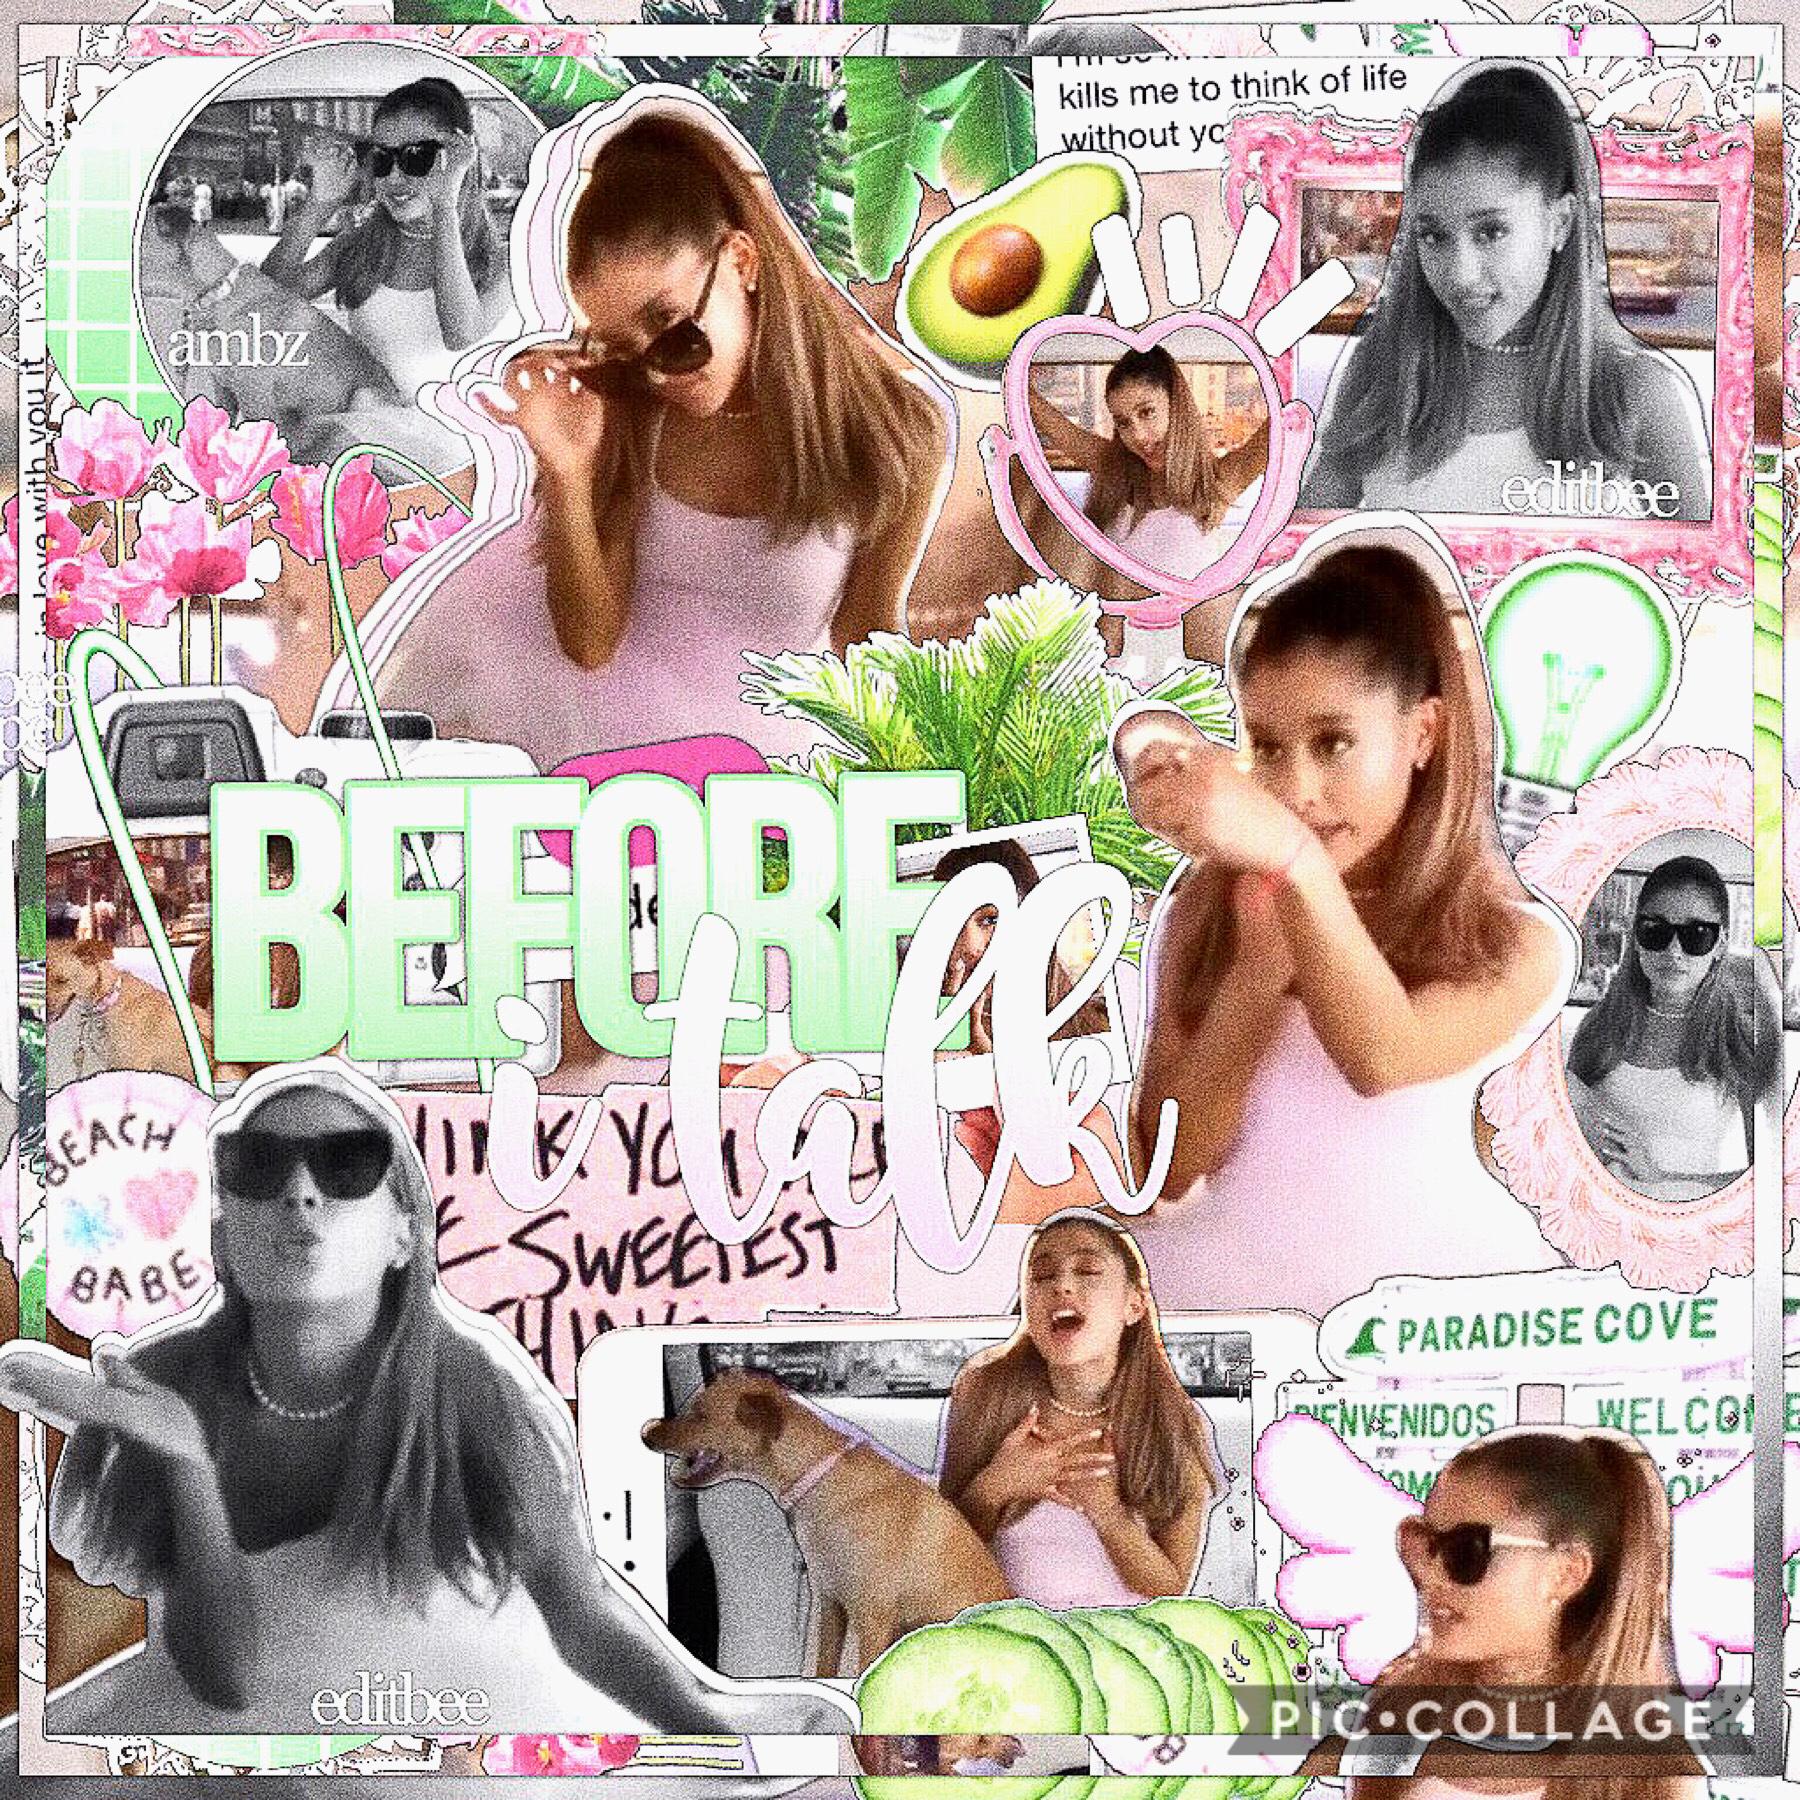 Kinda liking this??💕 this is my last edit before my new theme! I'm editing Ari a lot lately😘🍃
-
I'm not gonna post a theme divider though lol